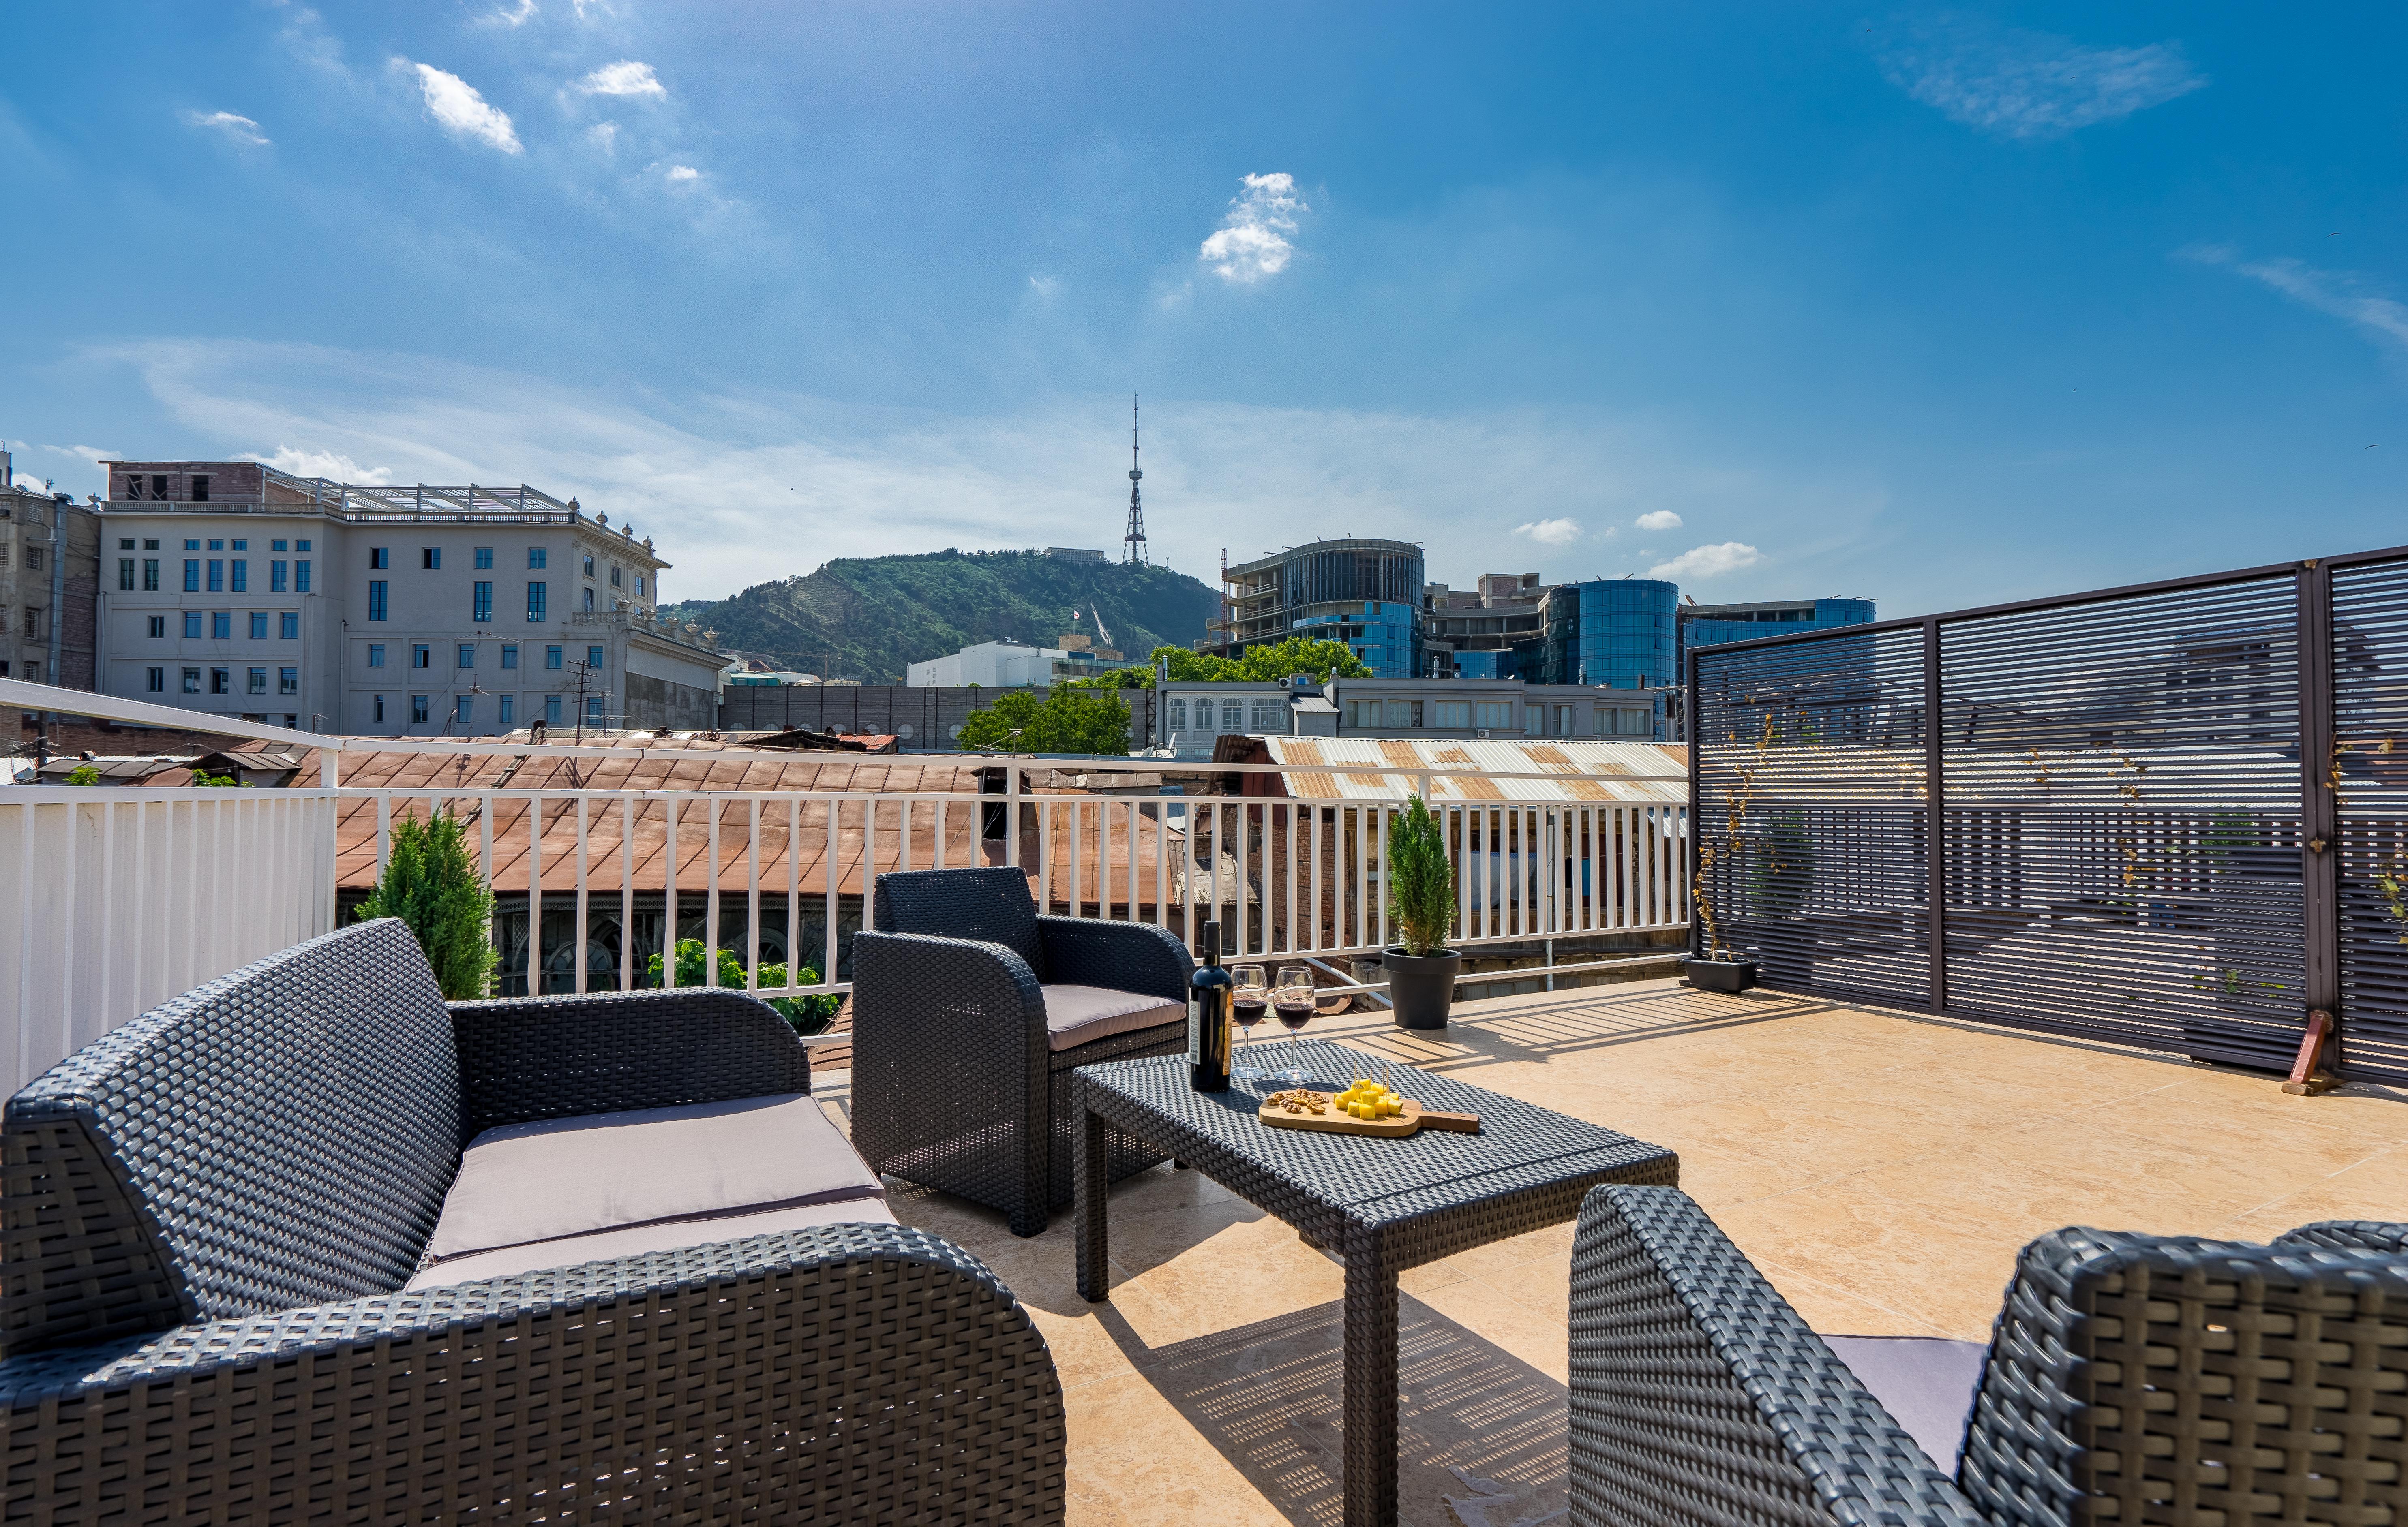 Hotel Imperial House Tbilisi Exterior photo